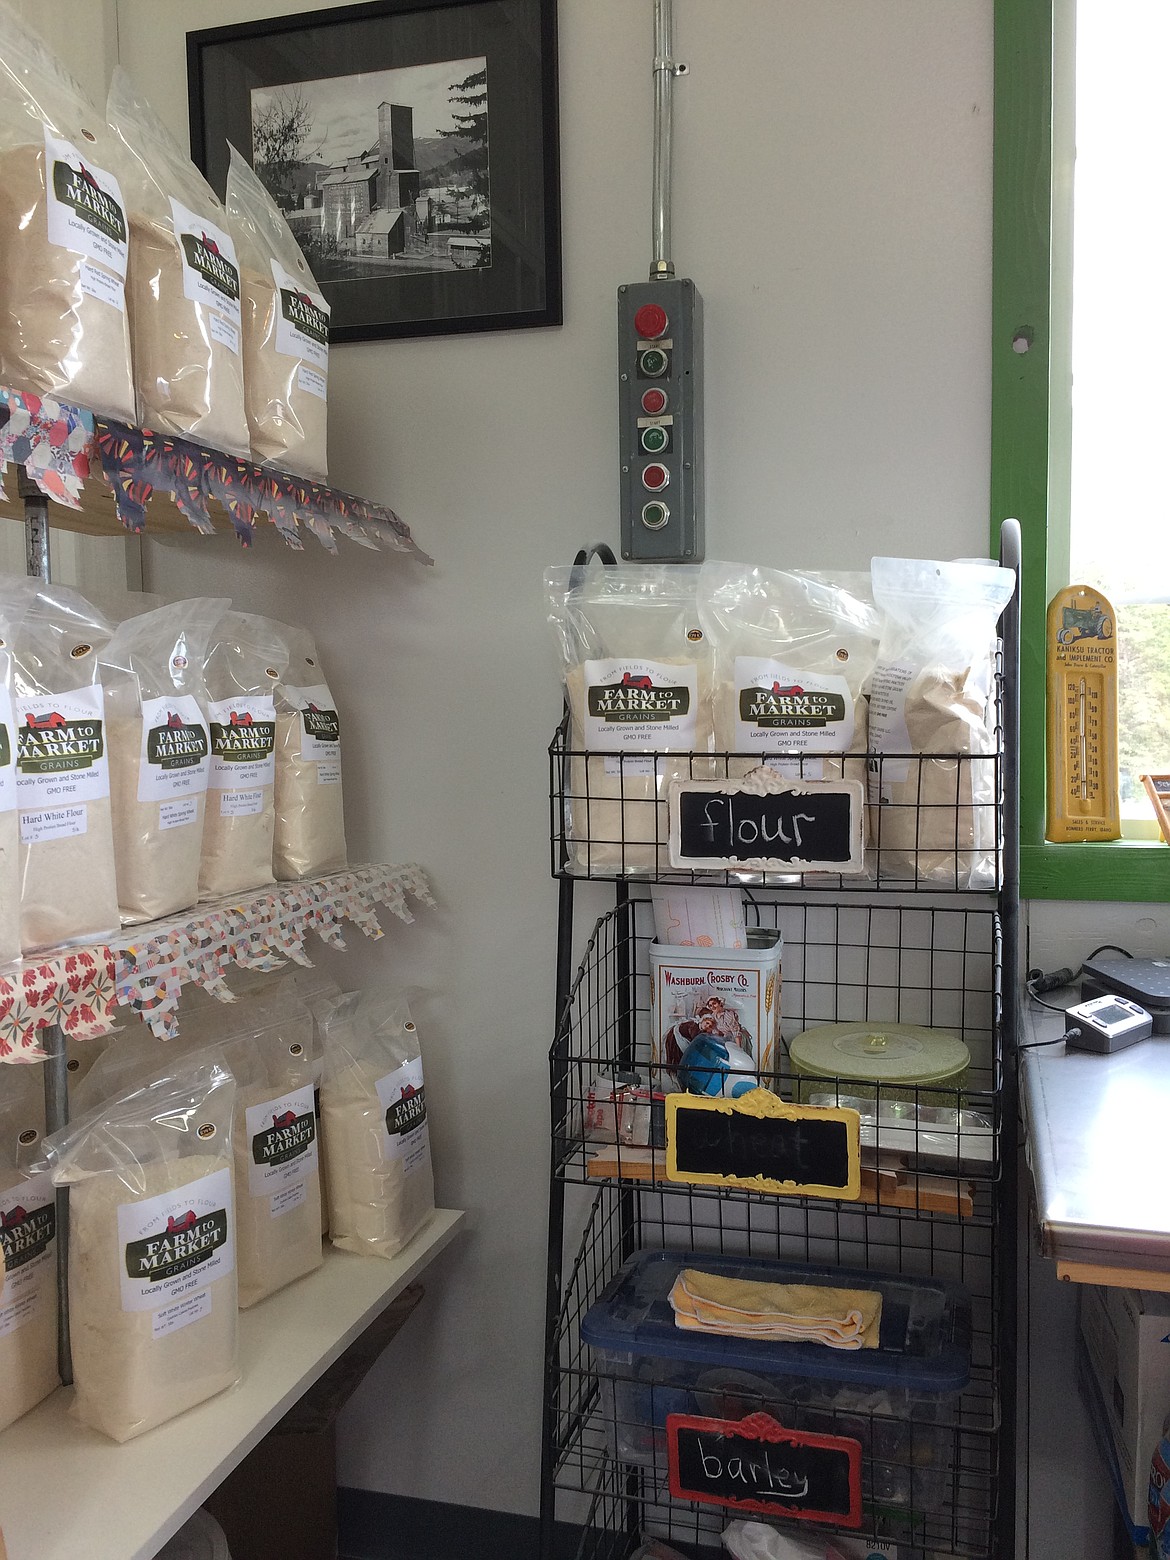 Farm to Market Flour mill packages.